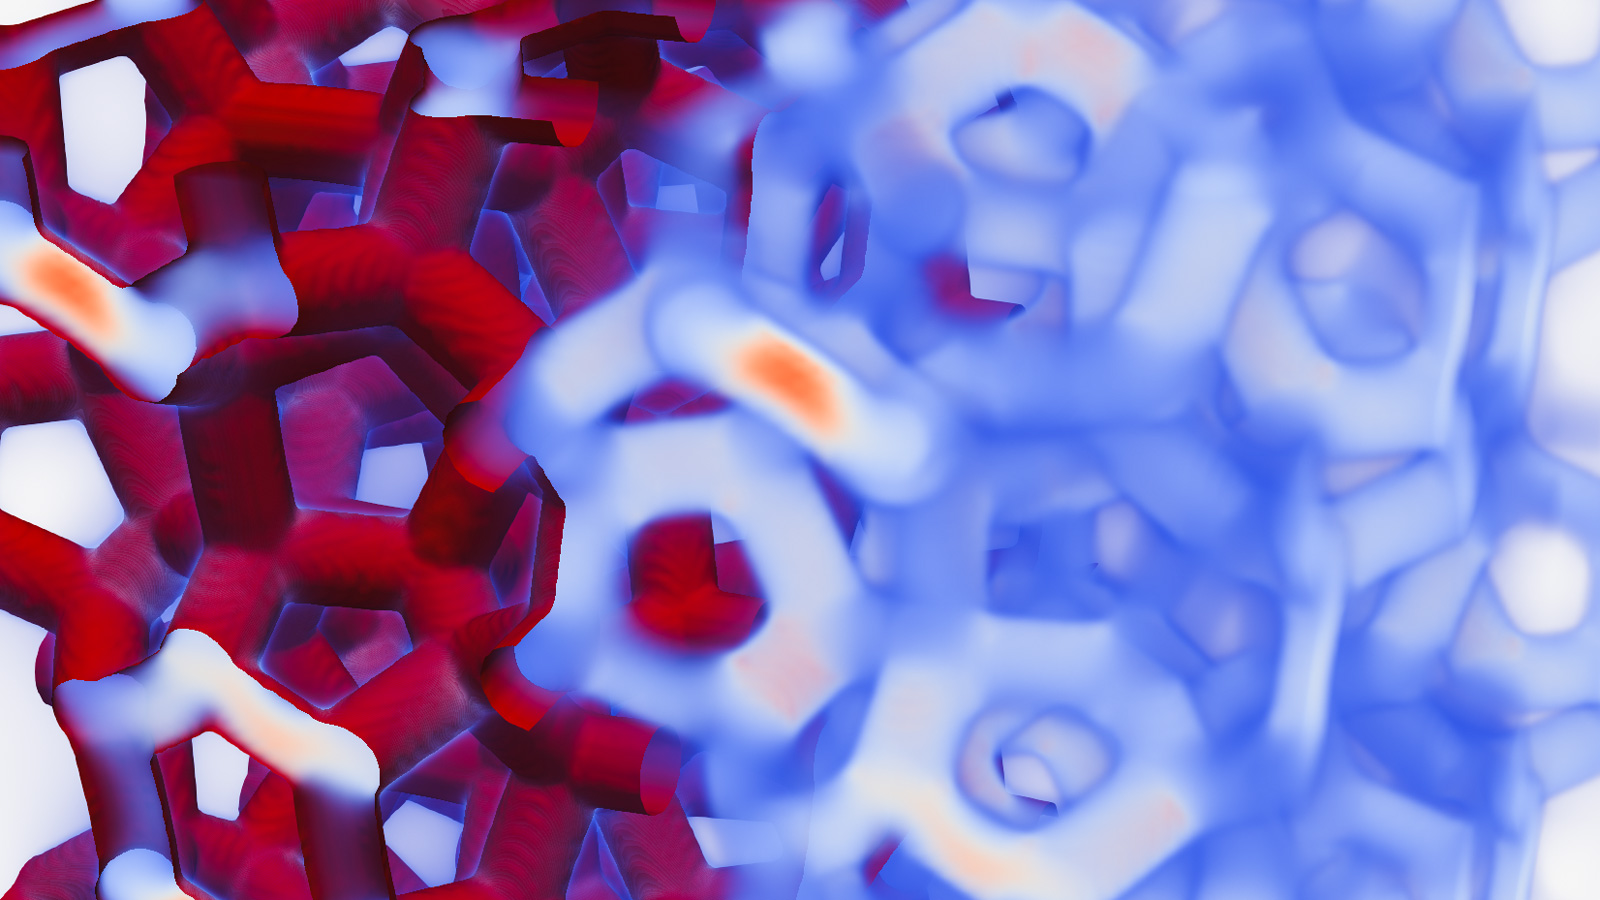 Computer rendering of interlocking geometric shapes, colored in blue and white tones on the right and red tones on the left